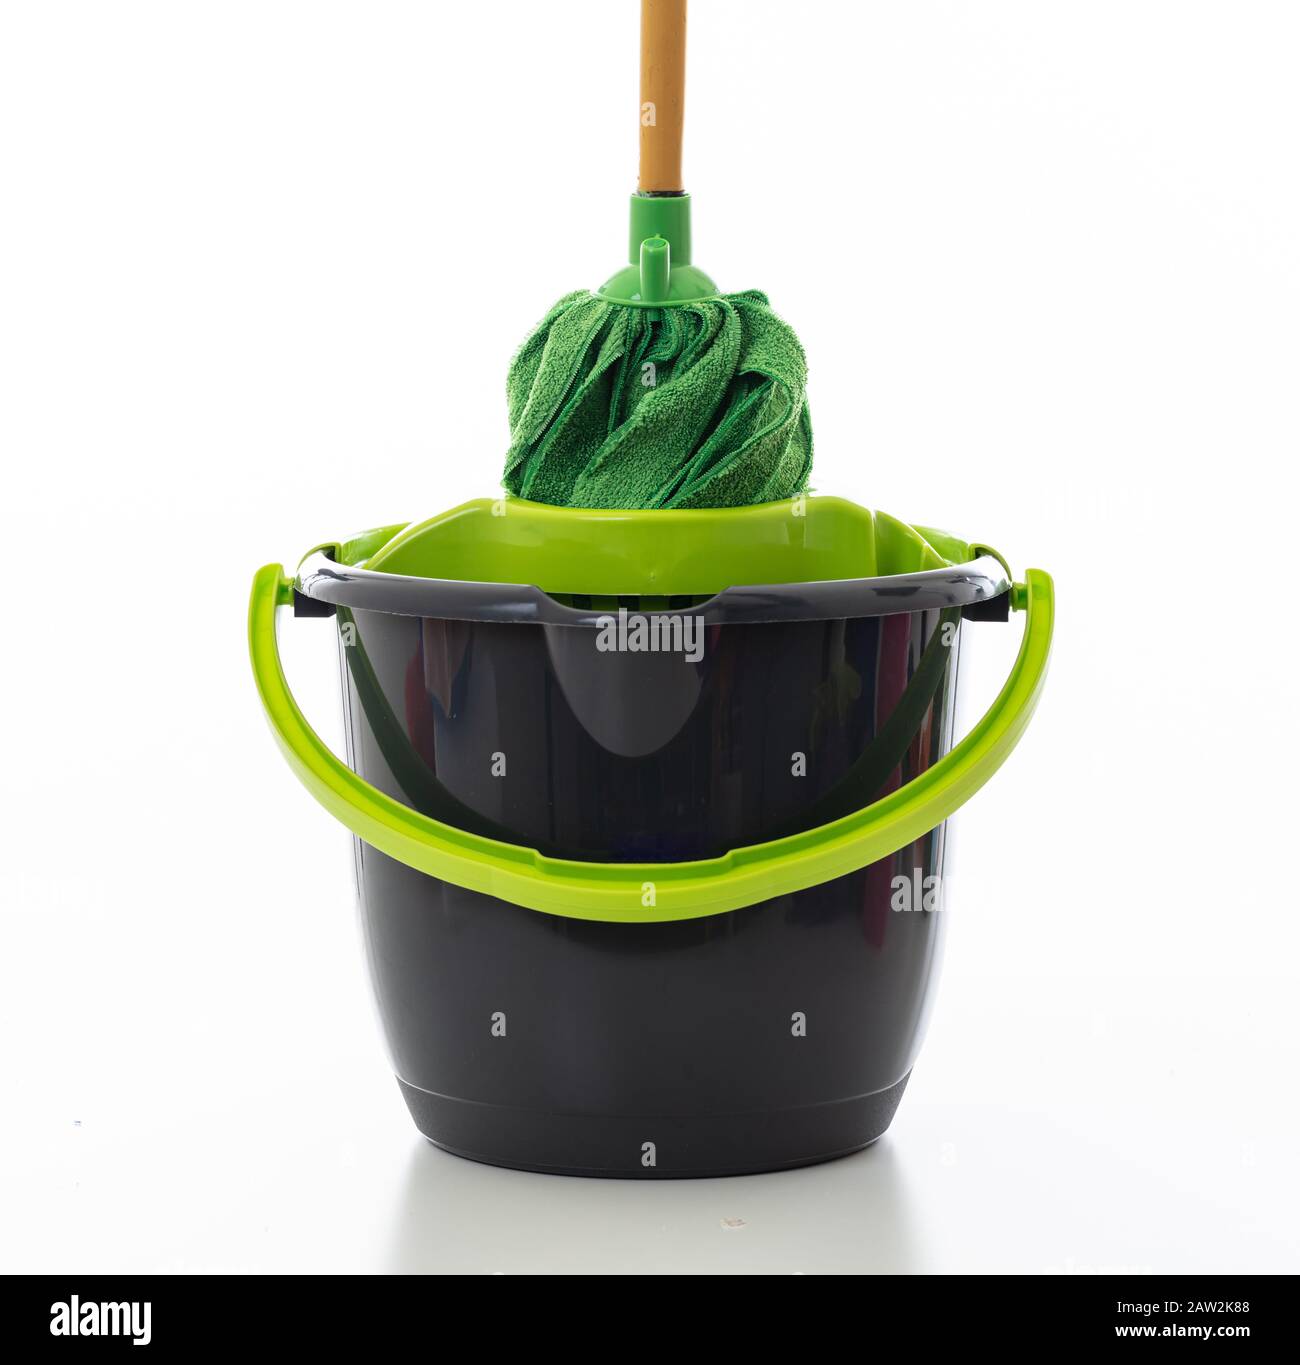 https://c8.alamy.com/comp/2AW2K88/cleaning-mop-on-a-bucket-green-black-color-isolated-against-white-background-domestic-household-cleaning-2AW2K88.jpg